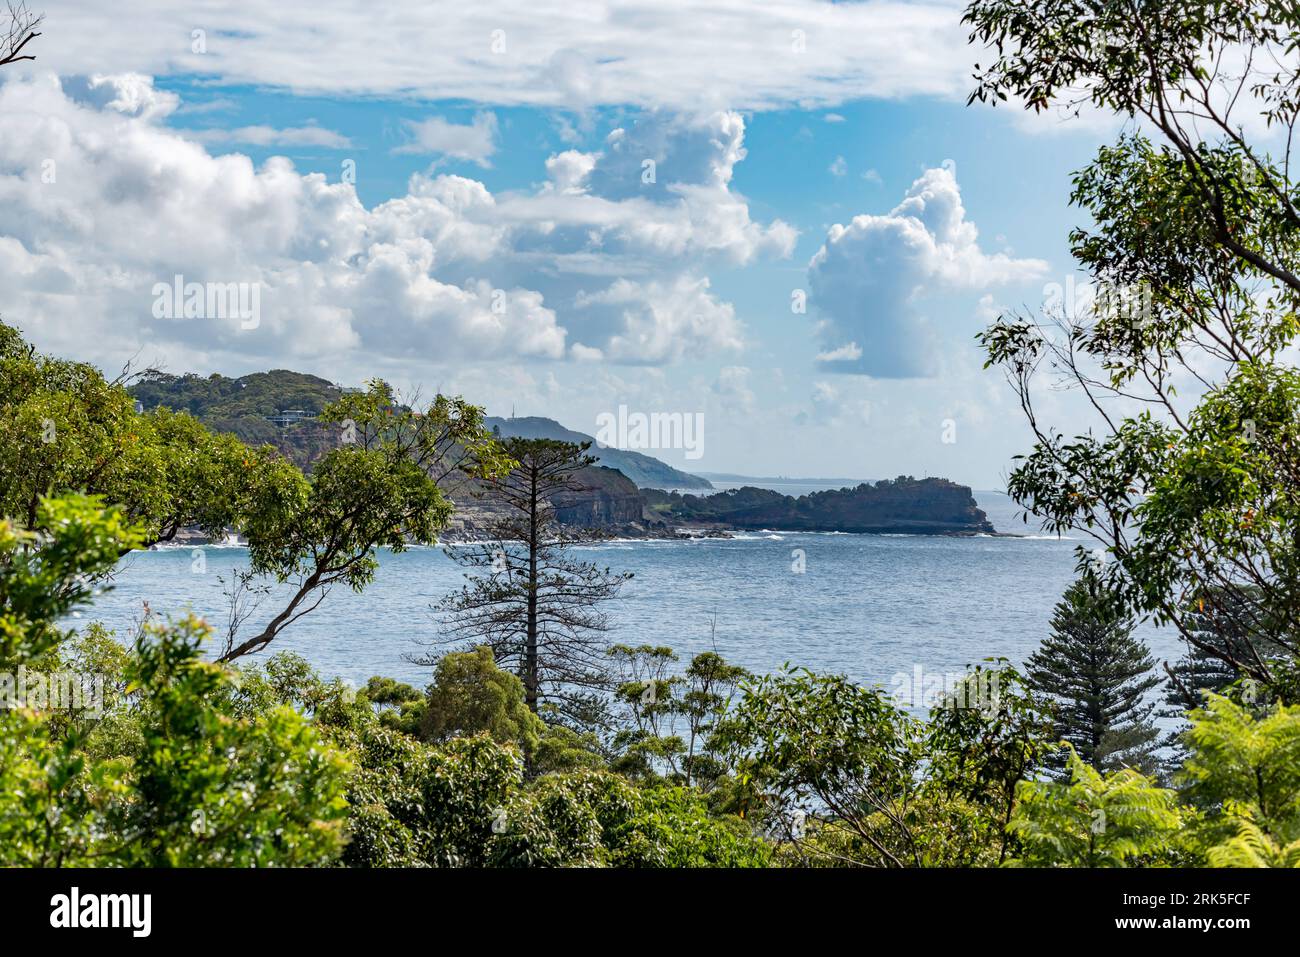 North Avoca Beach headland and rocks photographed from a home at the southern end of the beach in New South Wales, Australia Stock Photo